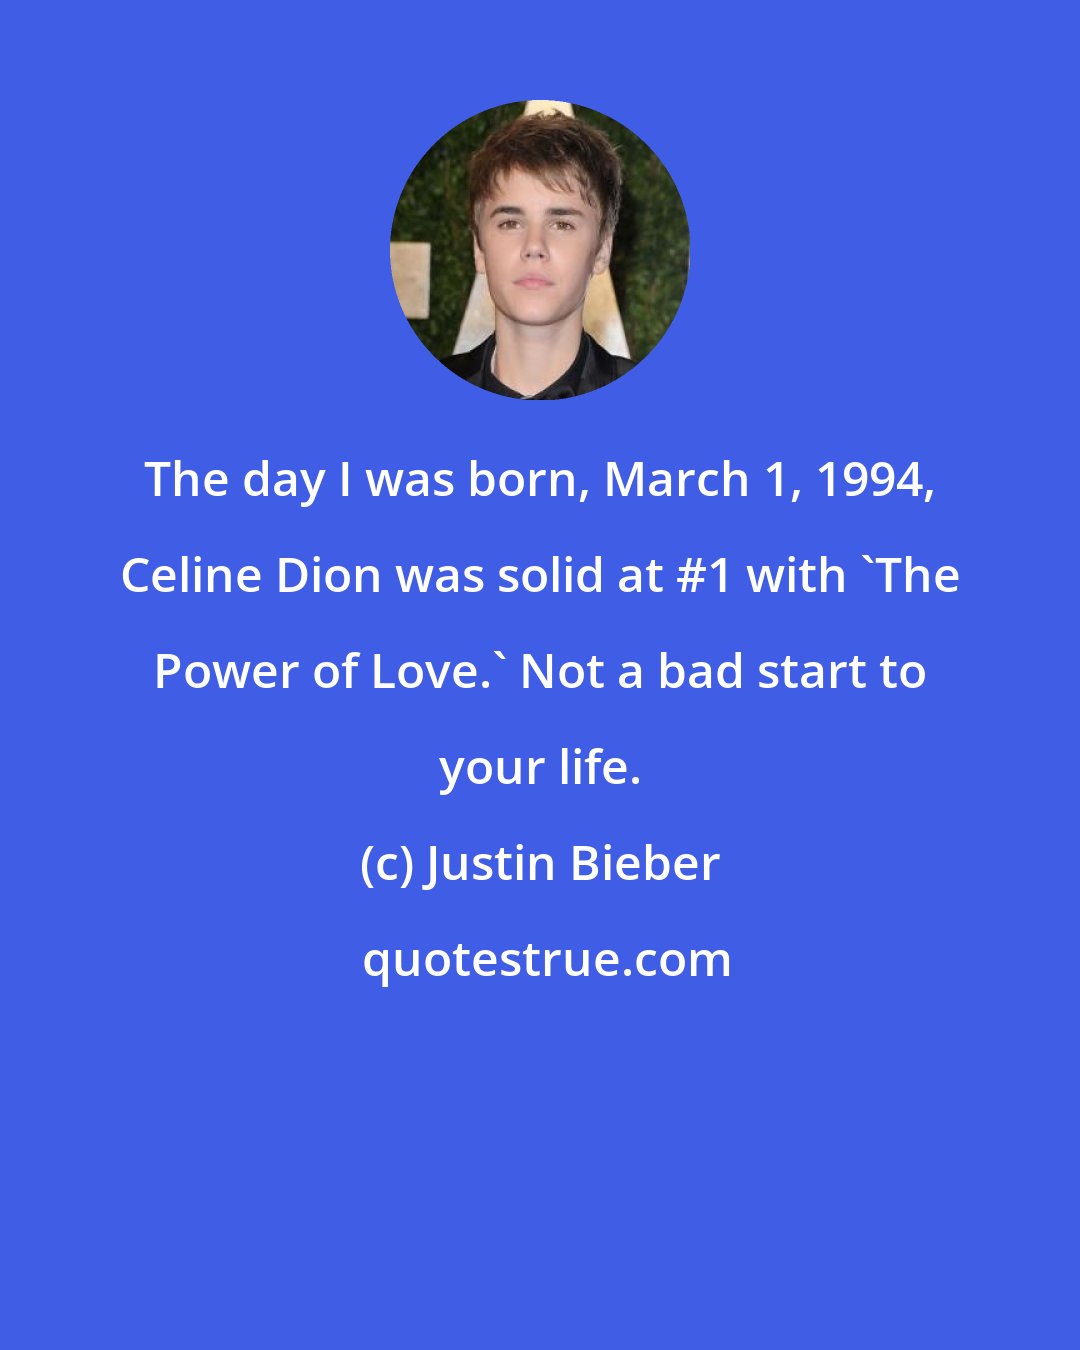 Justin Bieber: The day I was born, March 1, 1994, Celine Dion was solid at #1 with 'The Power of Love.' Not a bad start to your life.